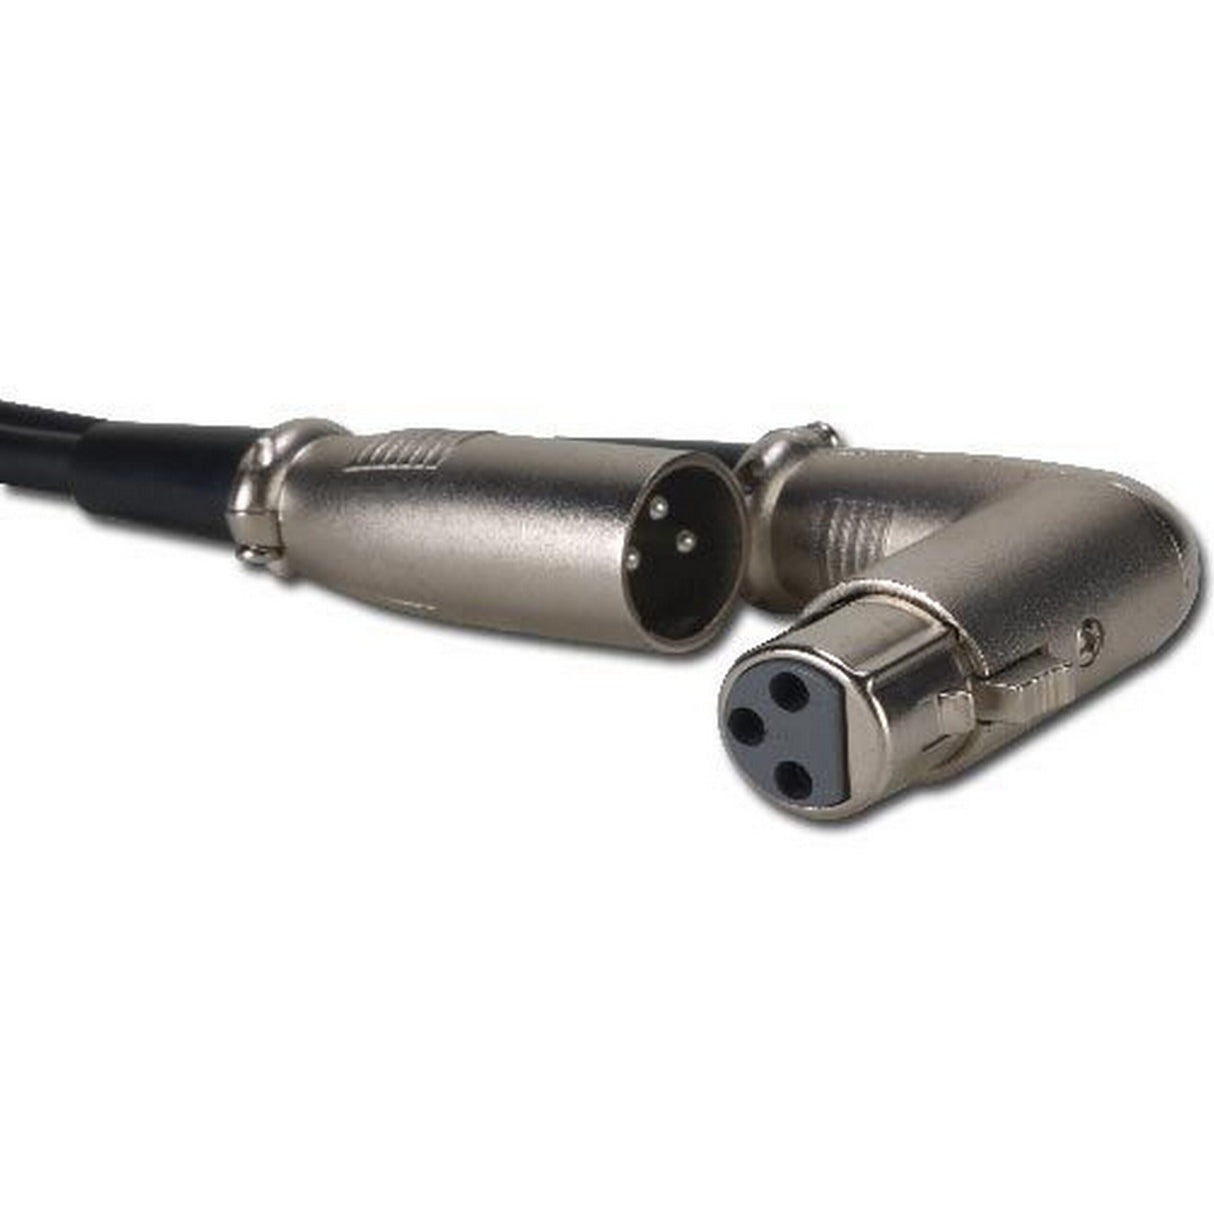 Accu Cable ACXLRRAAC 2-Pin XLR Right Angle Plug Adapter